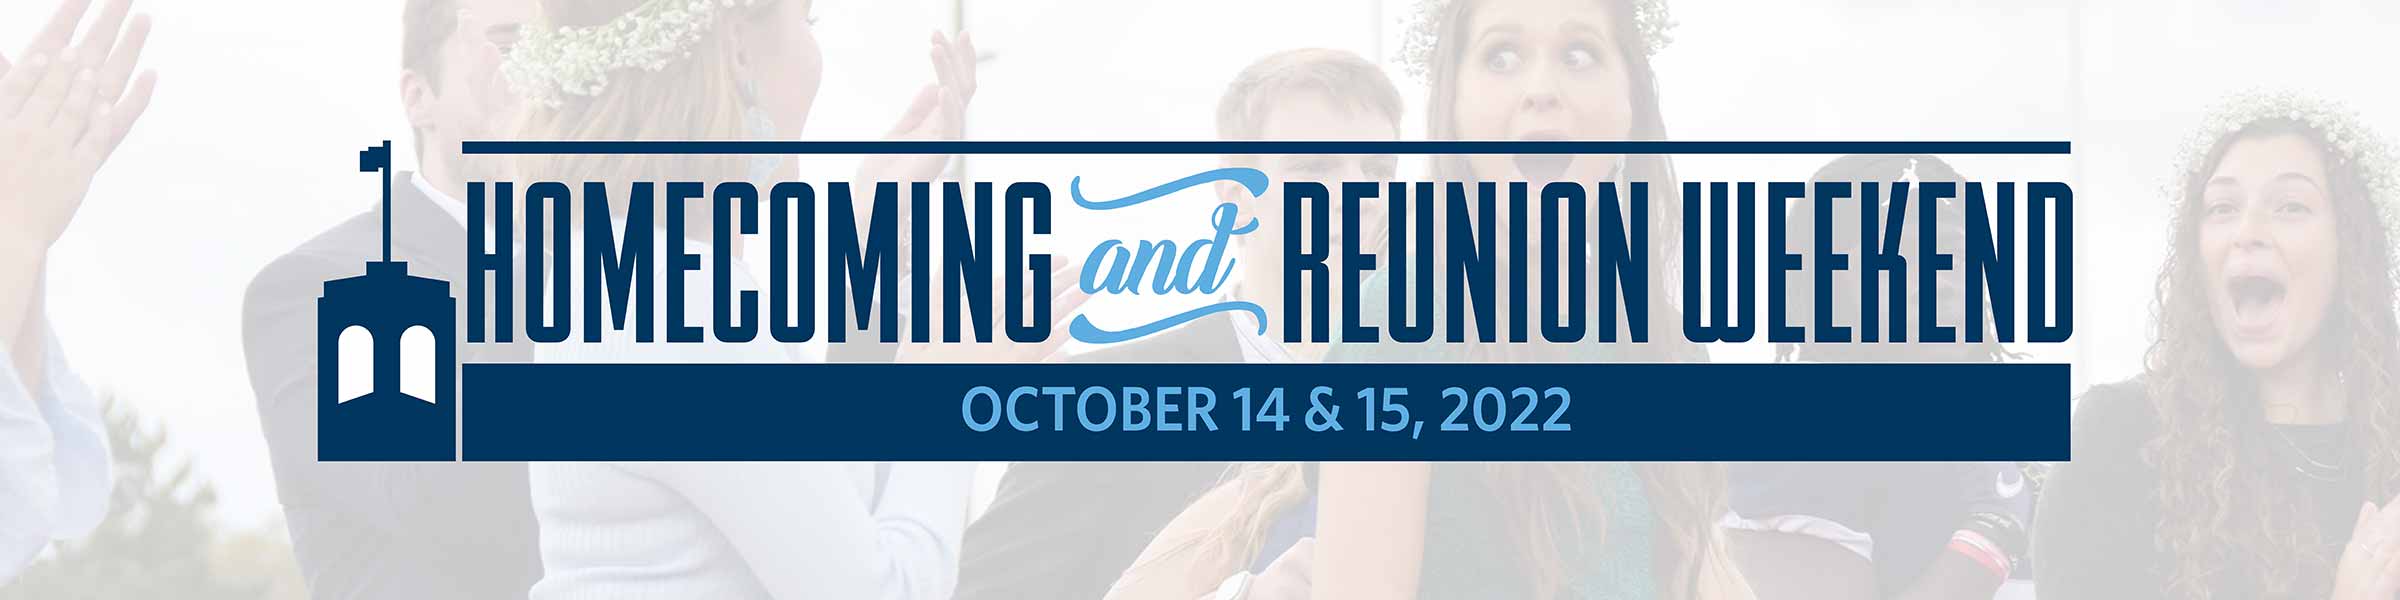 Homecoming and Reunion Weekend